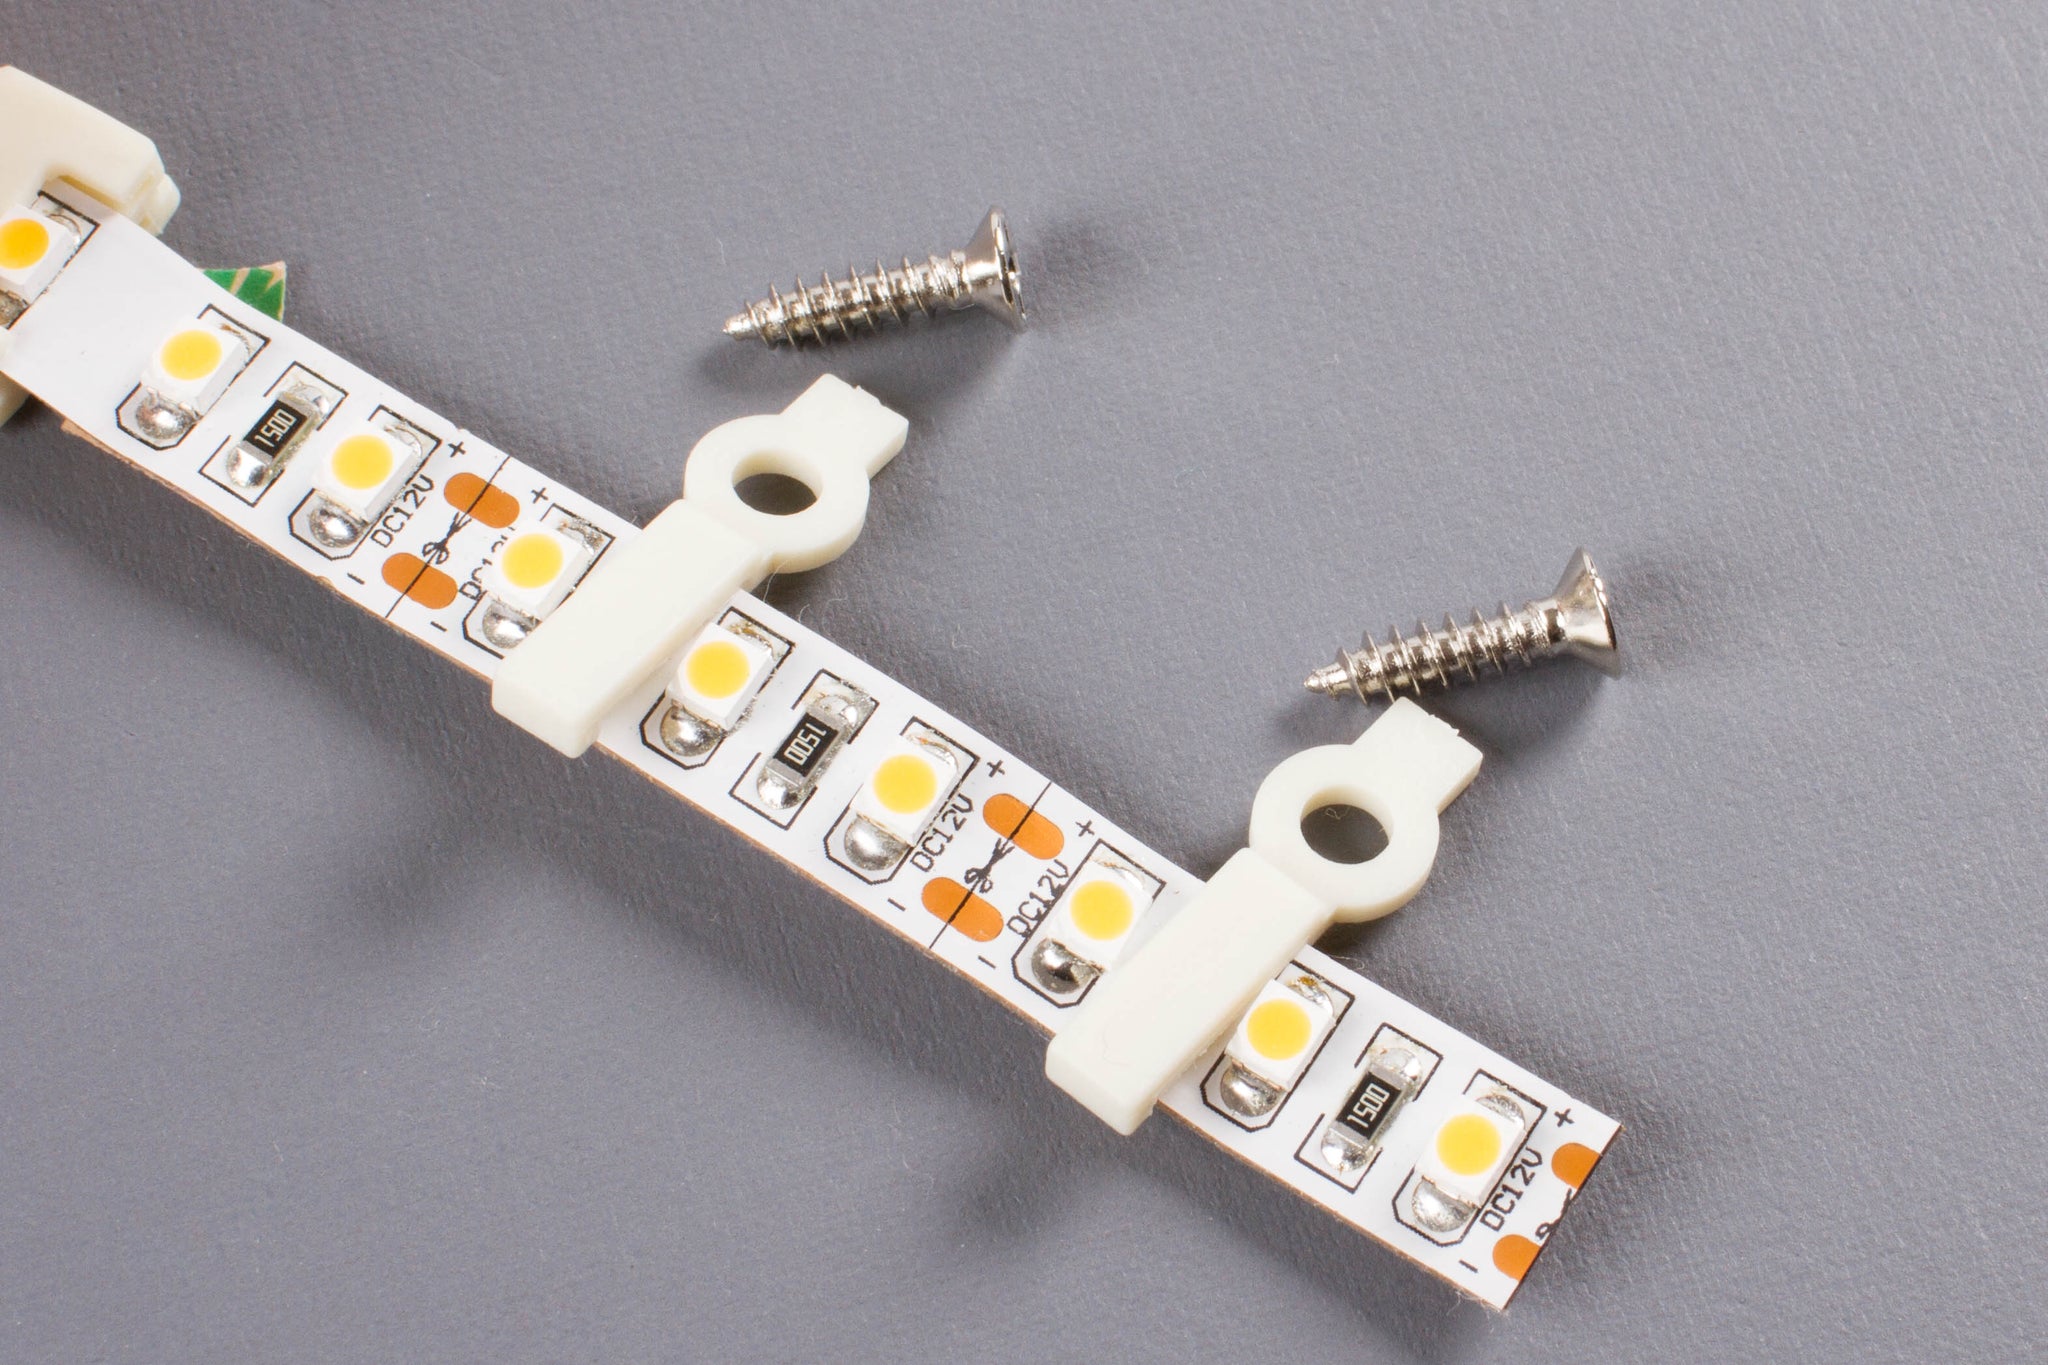 LED Strip mounting 10MM clip